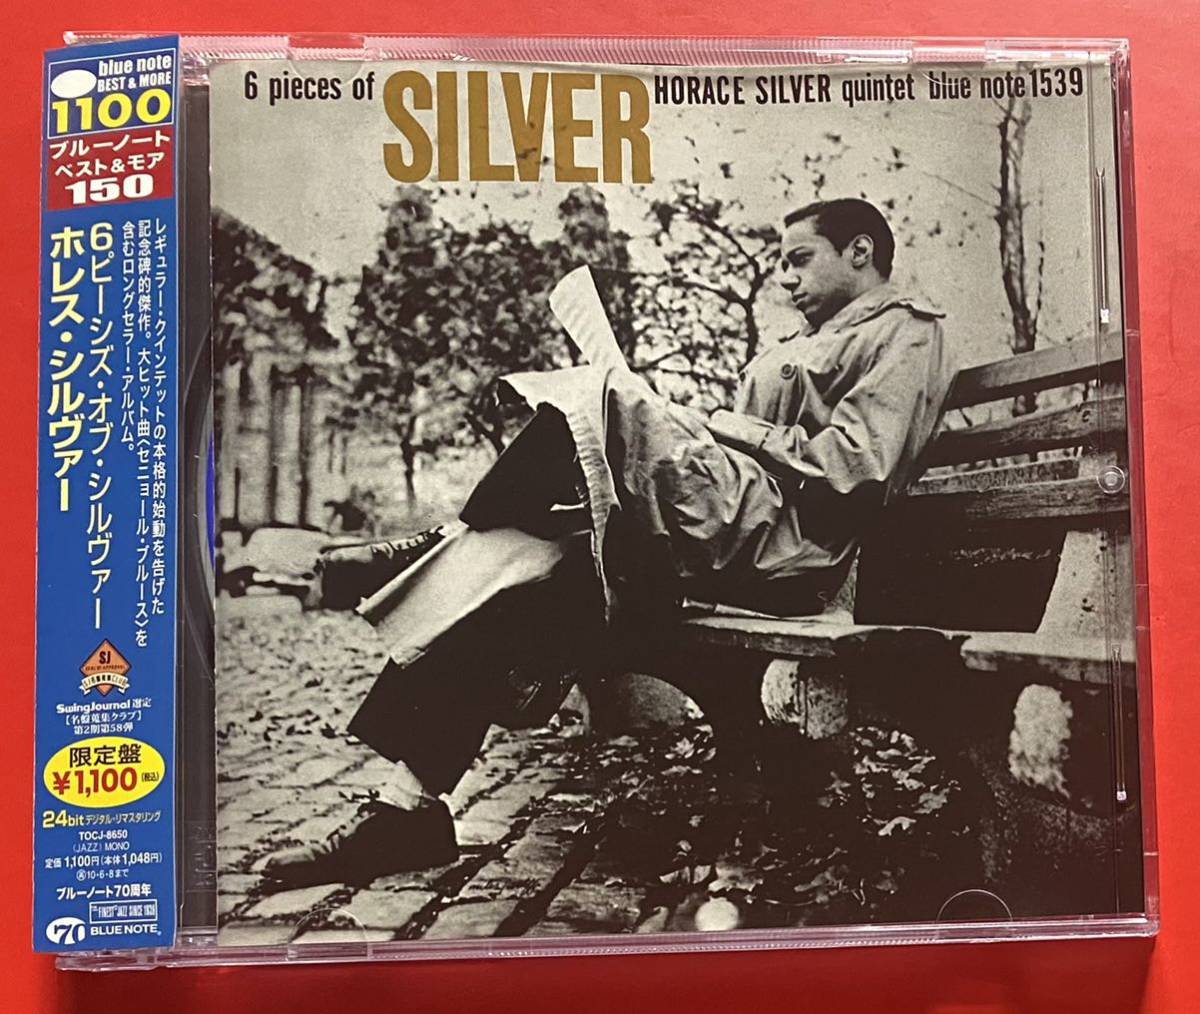 【CD】ホレス・シルヴァー「6 PIECES OF SILVER」HORACE SILVER 国内盤 [12250306]_画像1